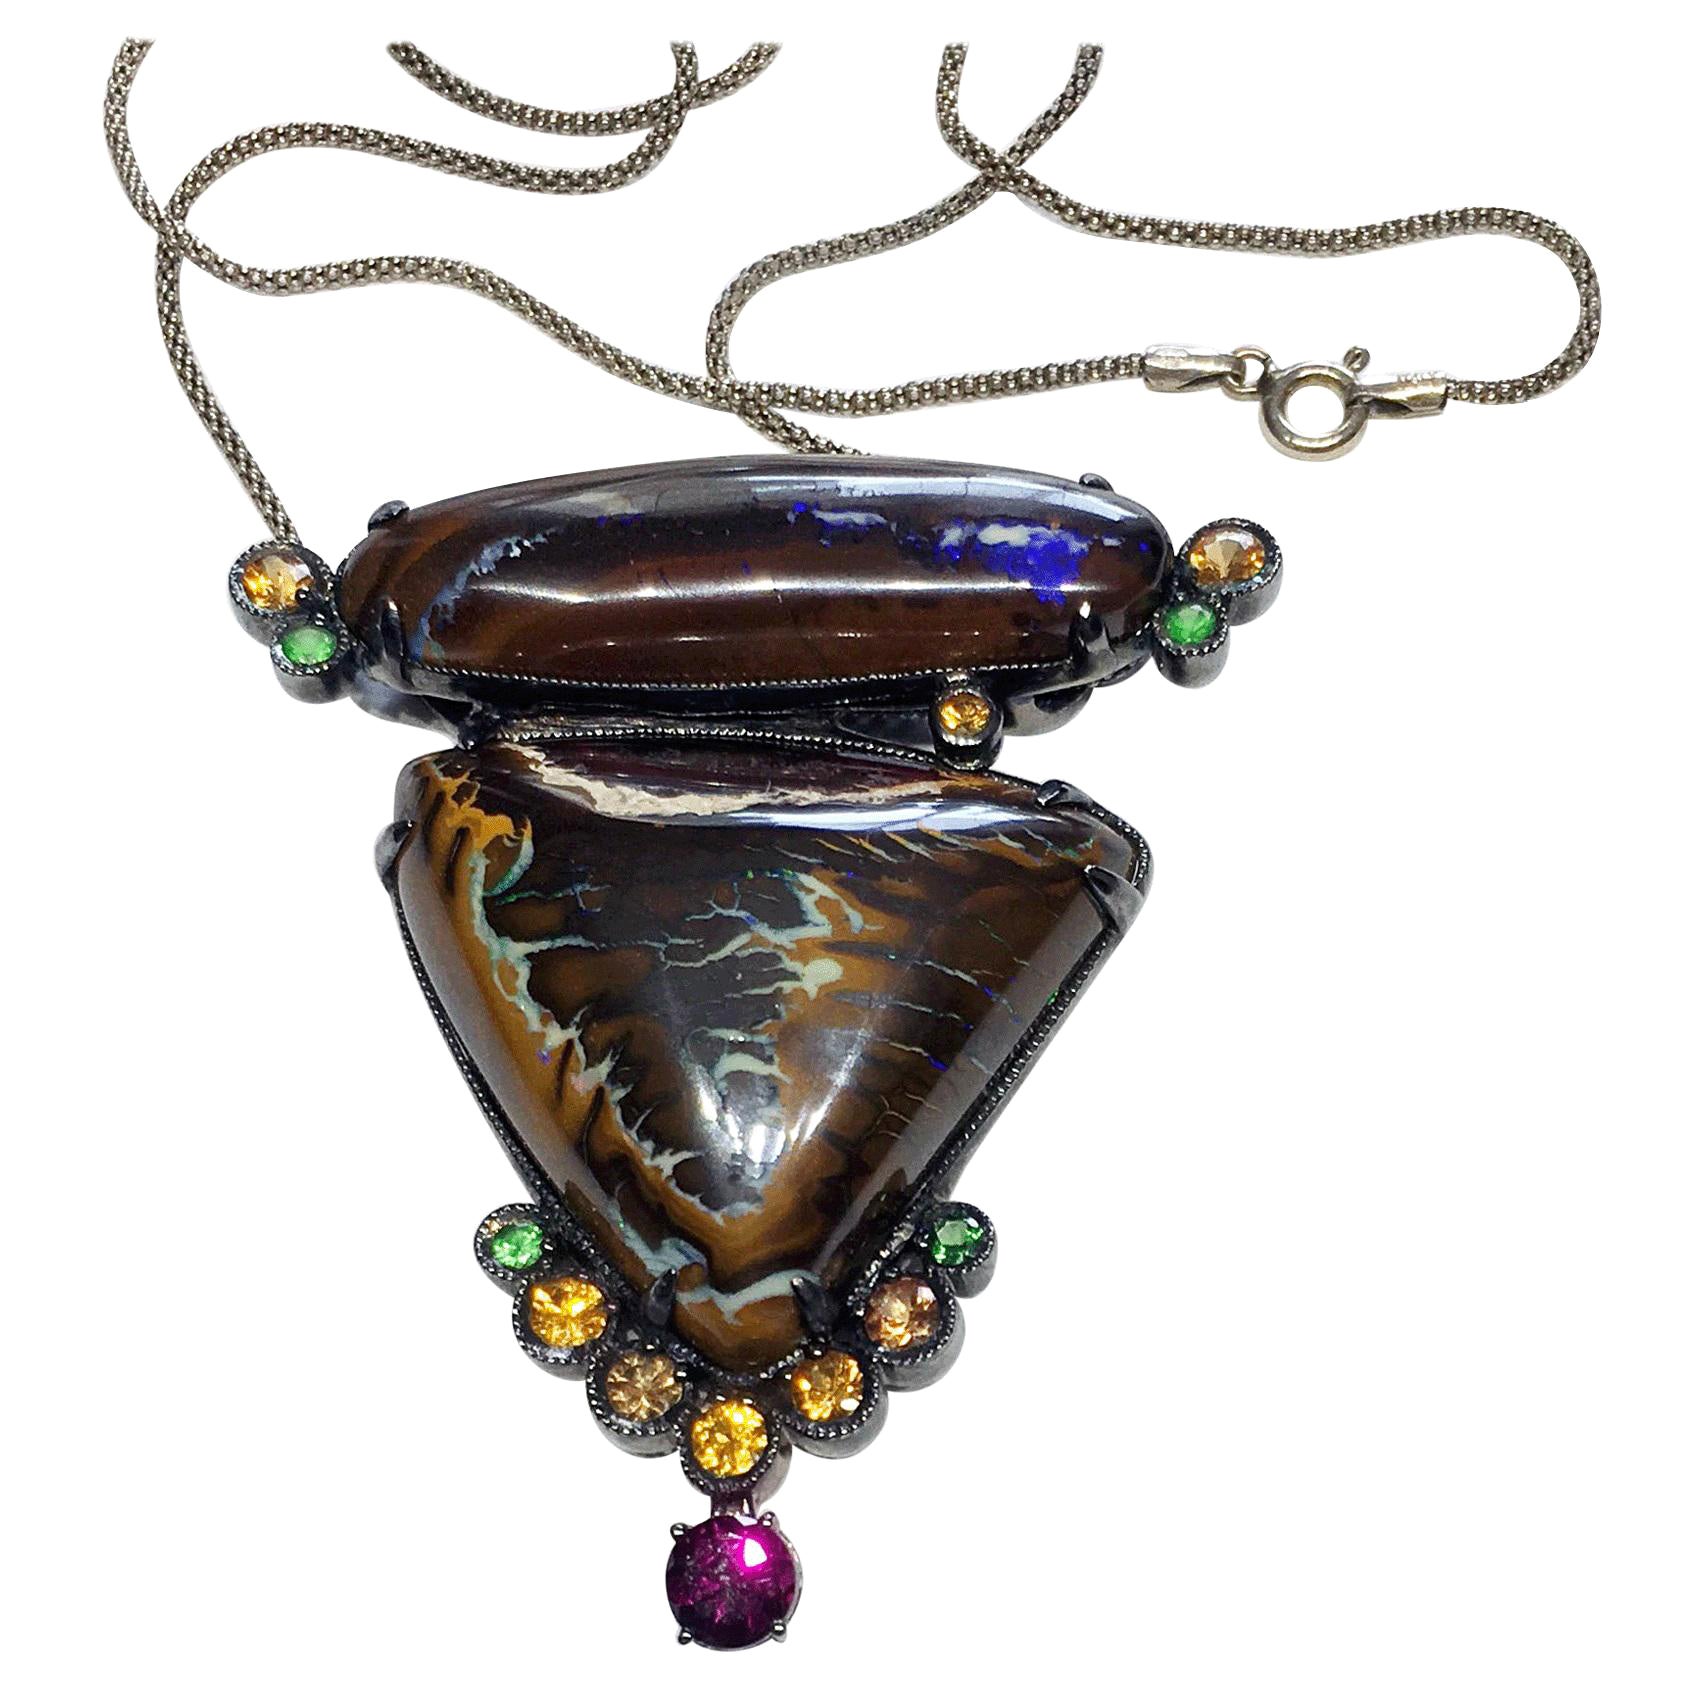 Blackened Silver Pendant with Boulder Opal, Garnet and Sapphire